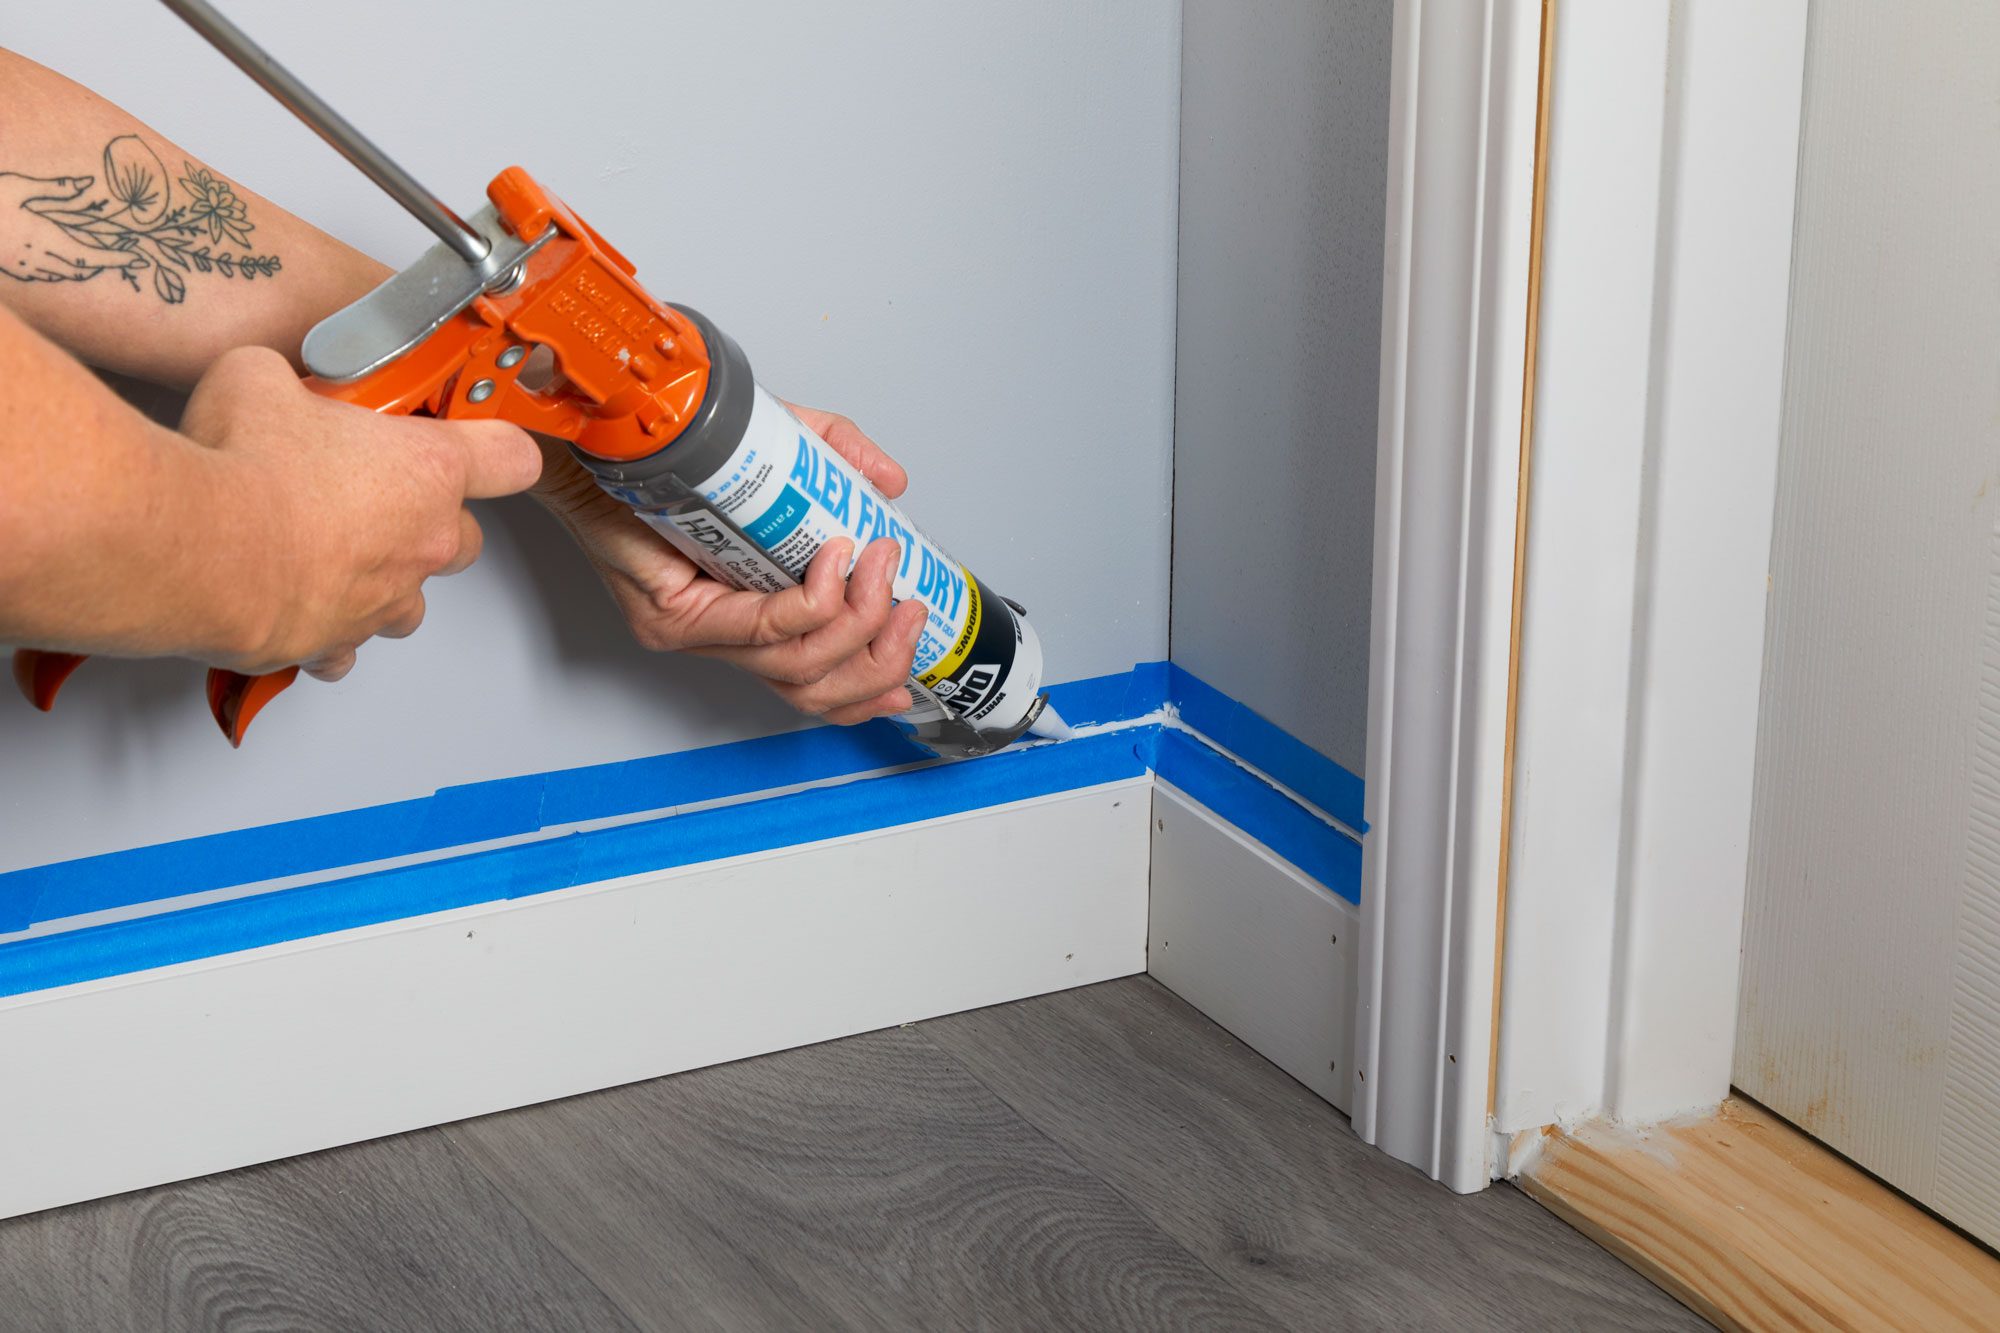 How to Keep Paint off a Carpet When Painting Baseboard - Fine Homebuilding